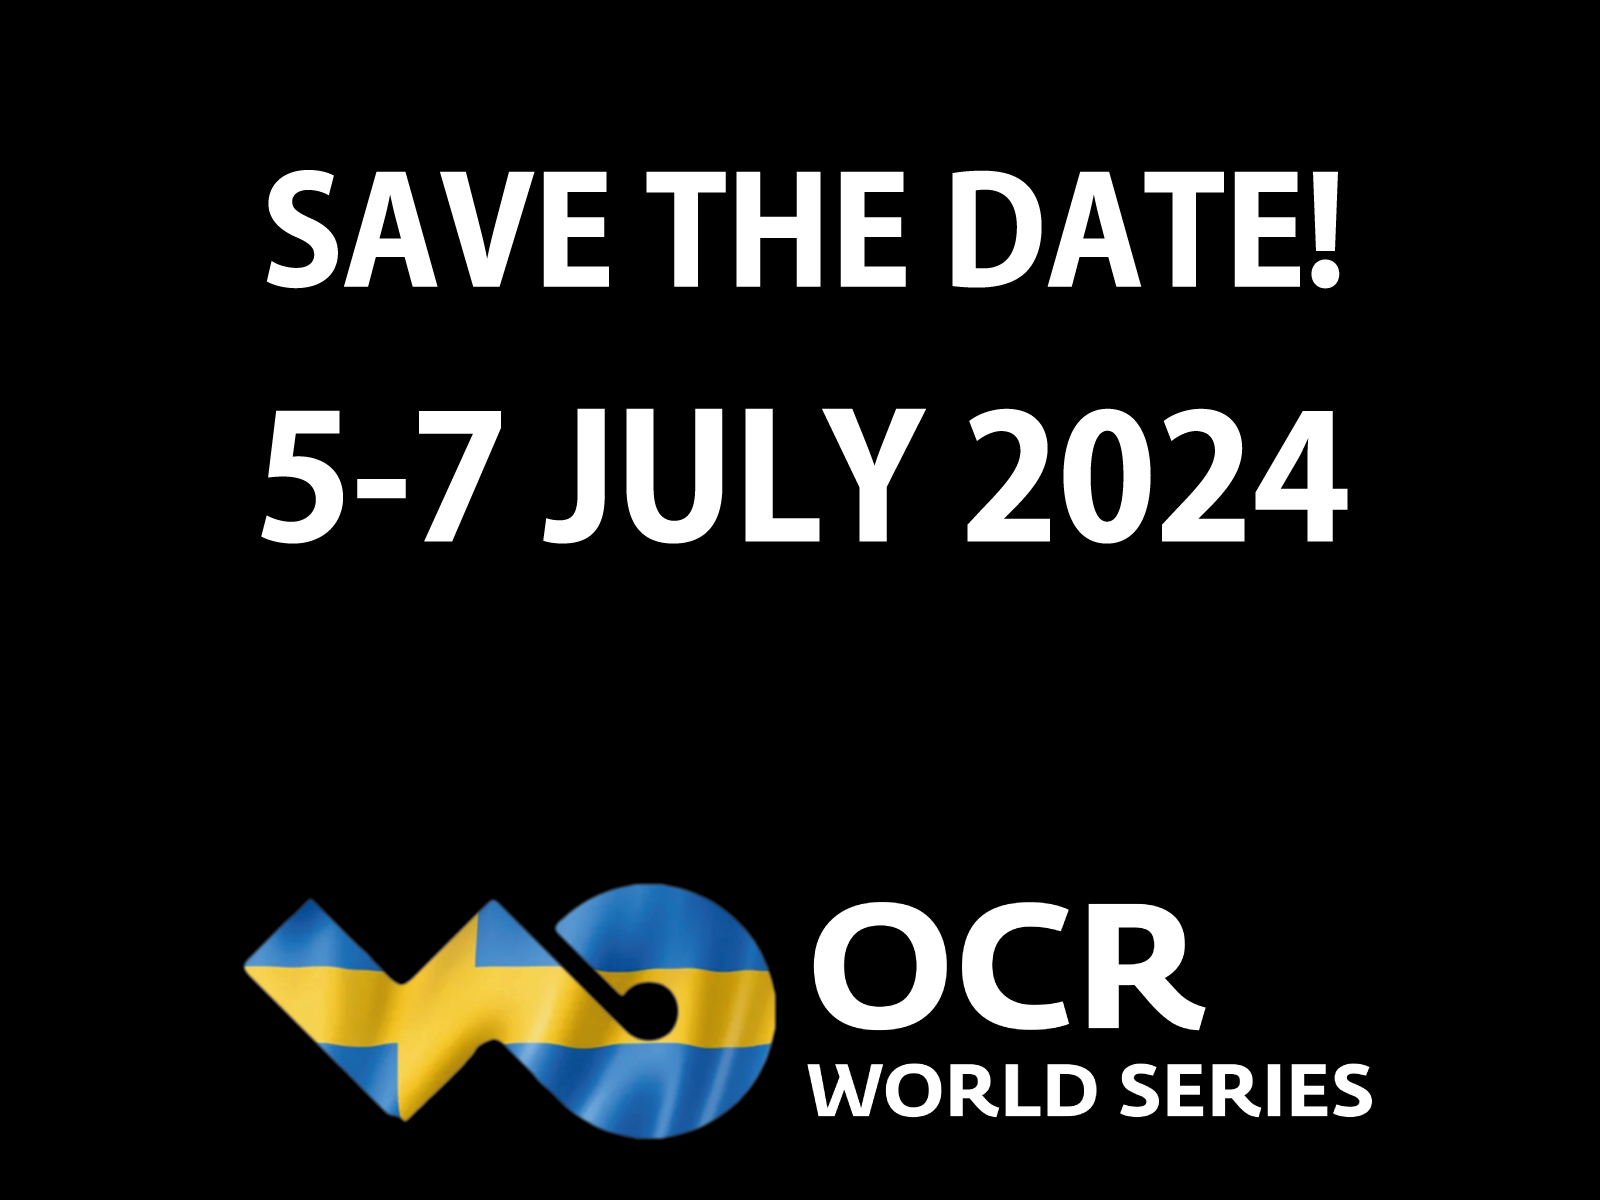 ocr-world-series-1600x1200.png